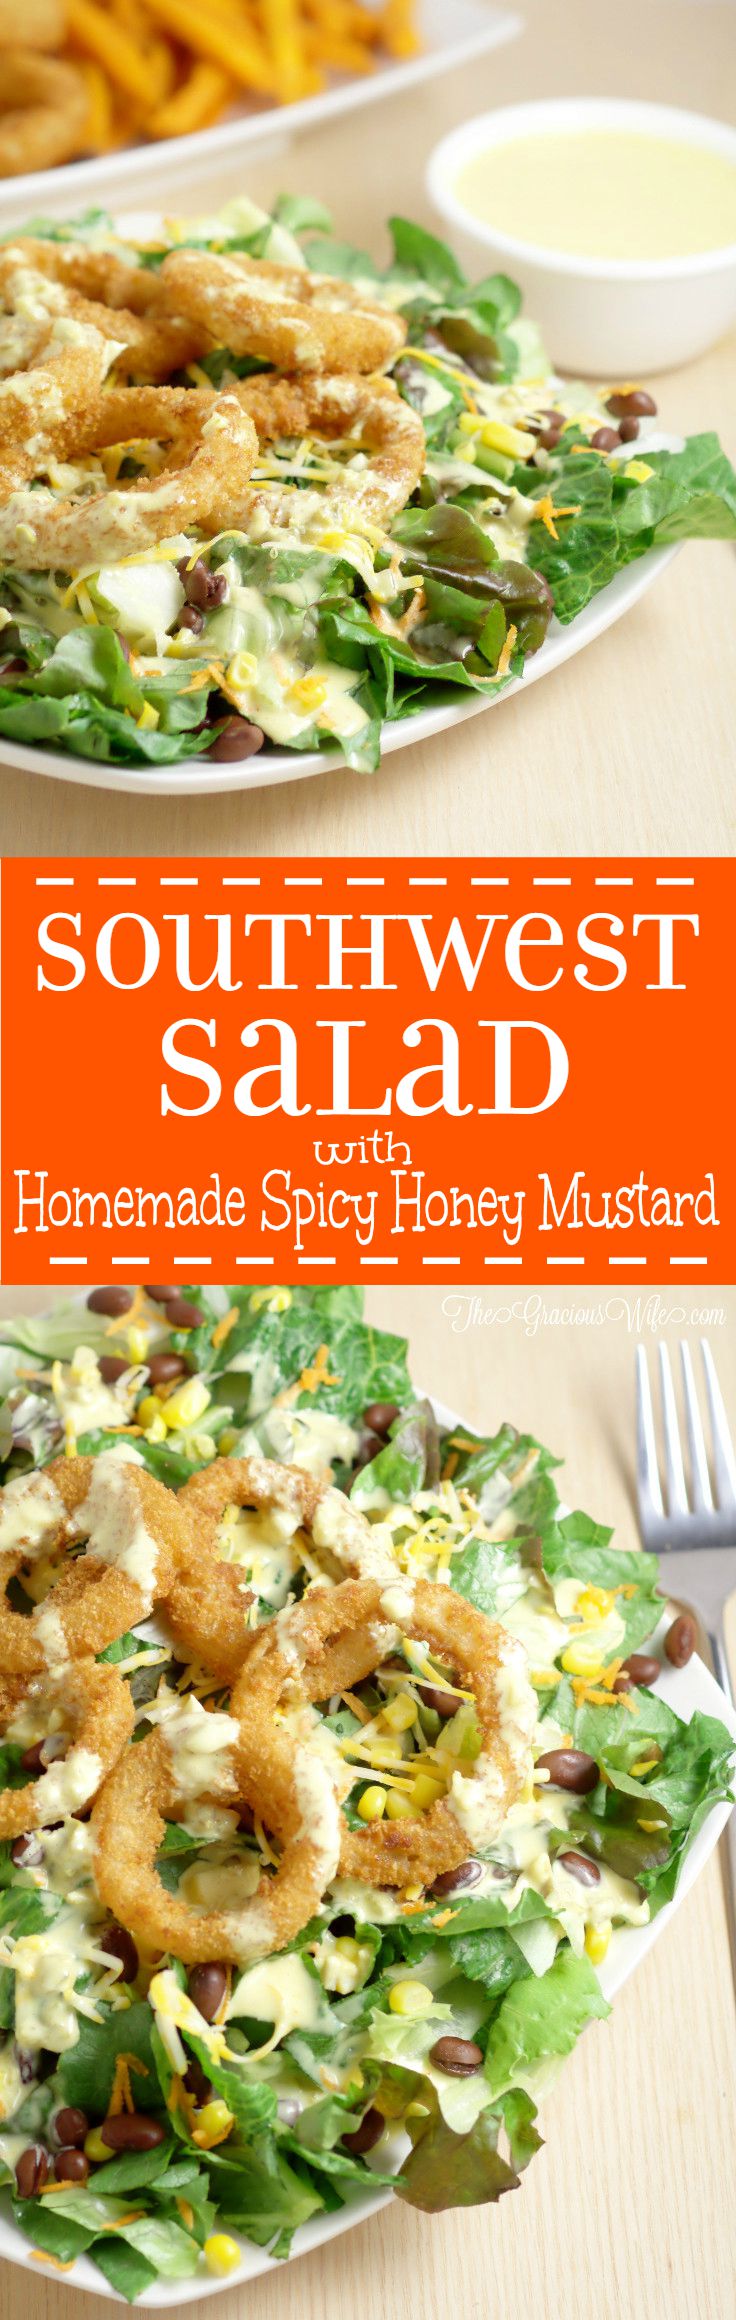 Southwest Salad Recipe with Spicy Honey Mustard Dressing Recipe - an easy salad recipe that's perfect for lunch or dinner. Onion Rings on a salad?! Yes, please!